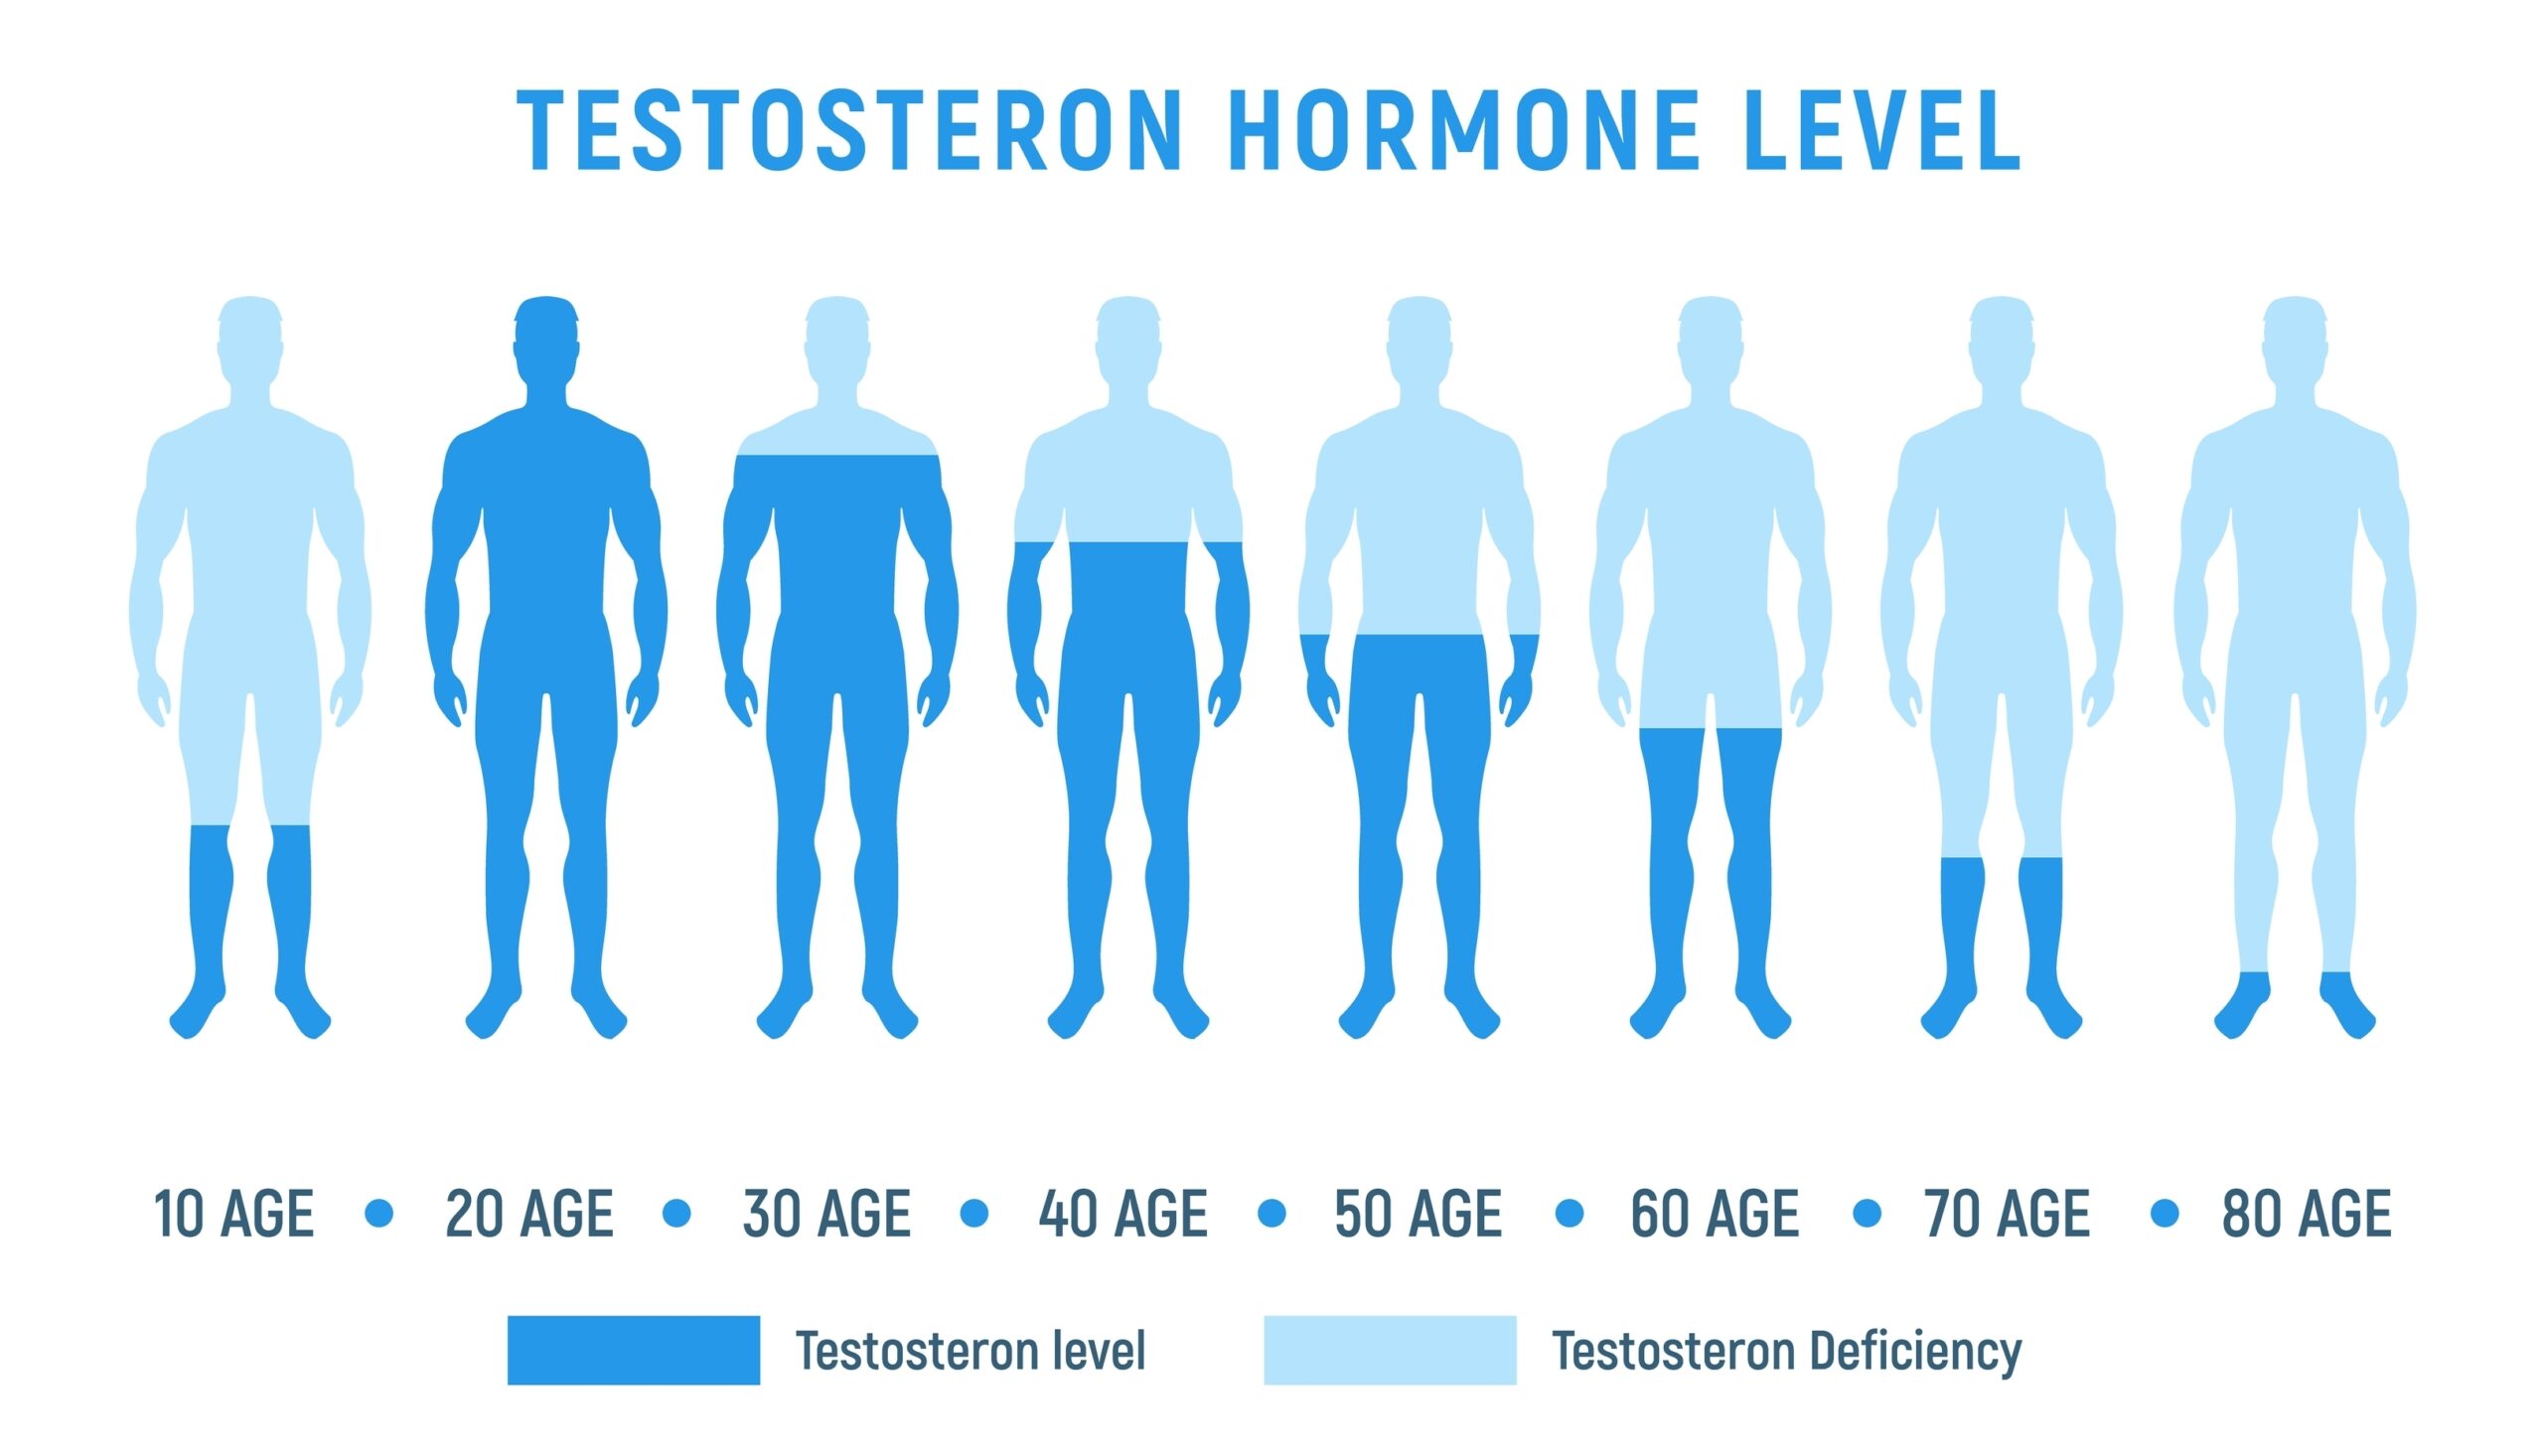 An illustrated timeline of testosterone reduction in men as they age used to determine whether someone is a good candidate for low testosterone treatment options.